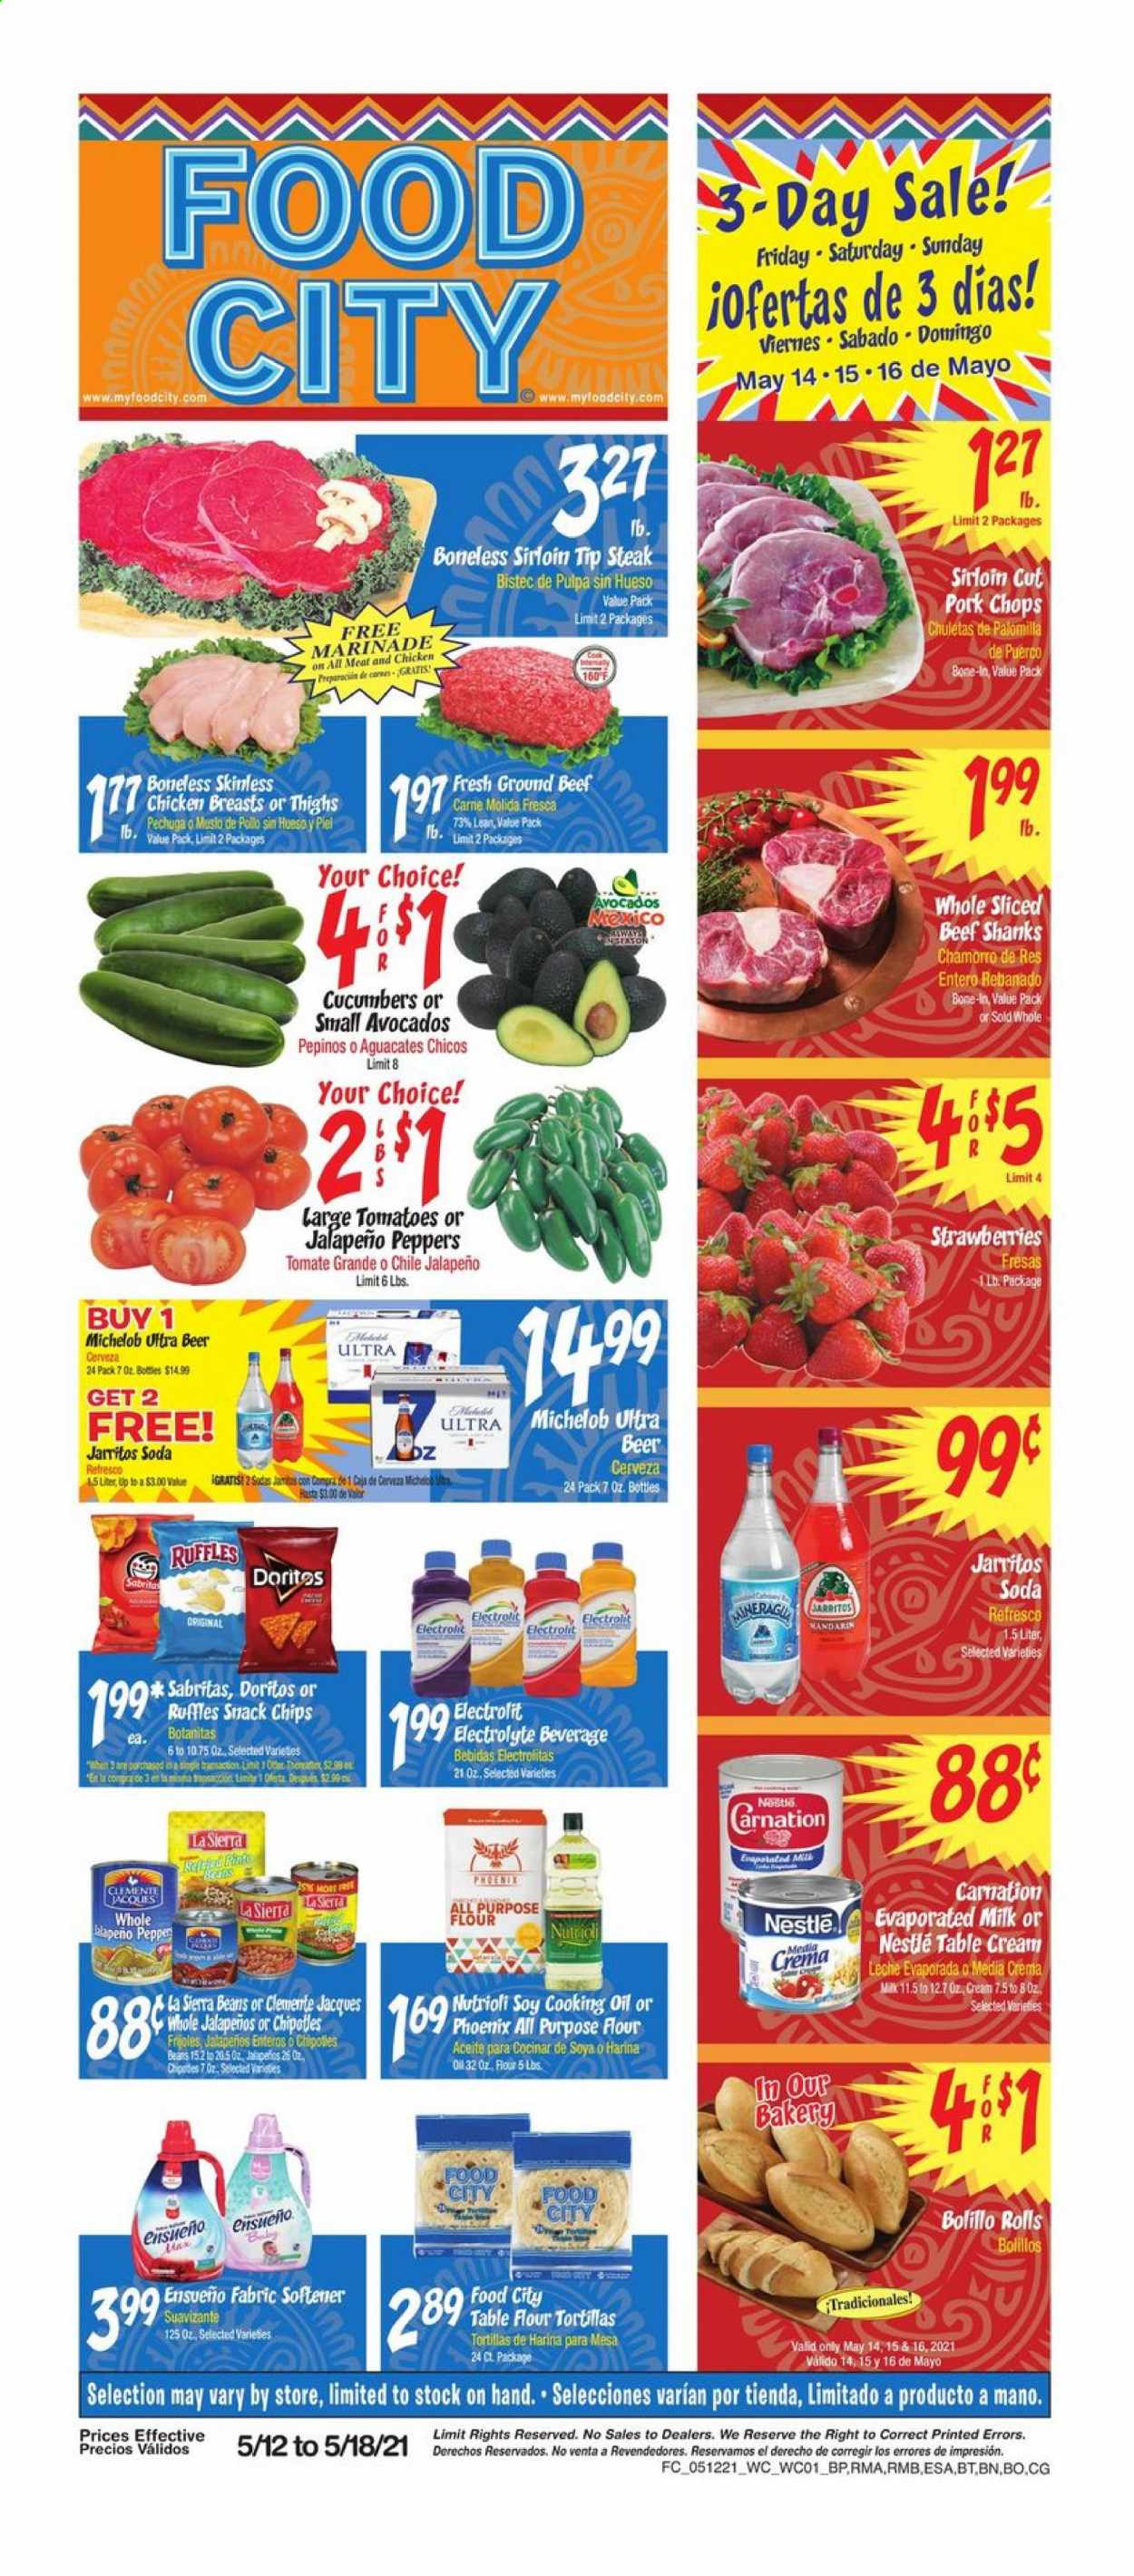 thumbnail - Food City Flyer - 05/12/2021 - 05/18/2021 - Sales products - Michelob, tortillas, flour tortillas, beans, cucumber, tomatoes, avocado, mandarines, strawberries, evaporated milk, Nestlé, Doritos, chips, Ruffles, all purpose flour, marinade, soda, beer, chicken breasts, beef meat, ground beef, steak, pork chops, pork meat. Page 1.